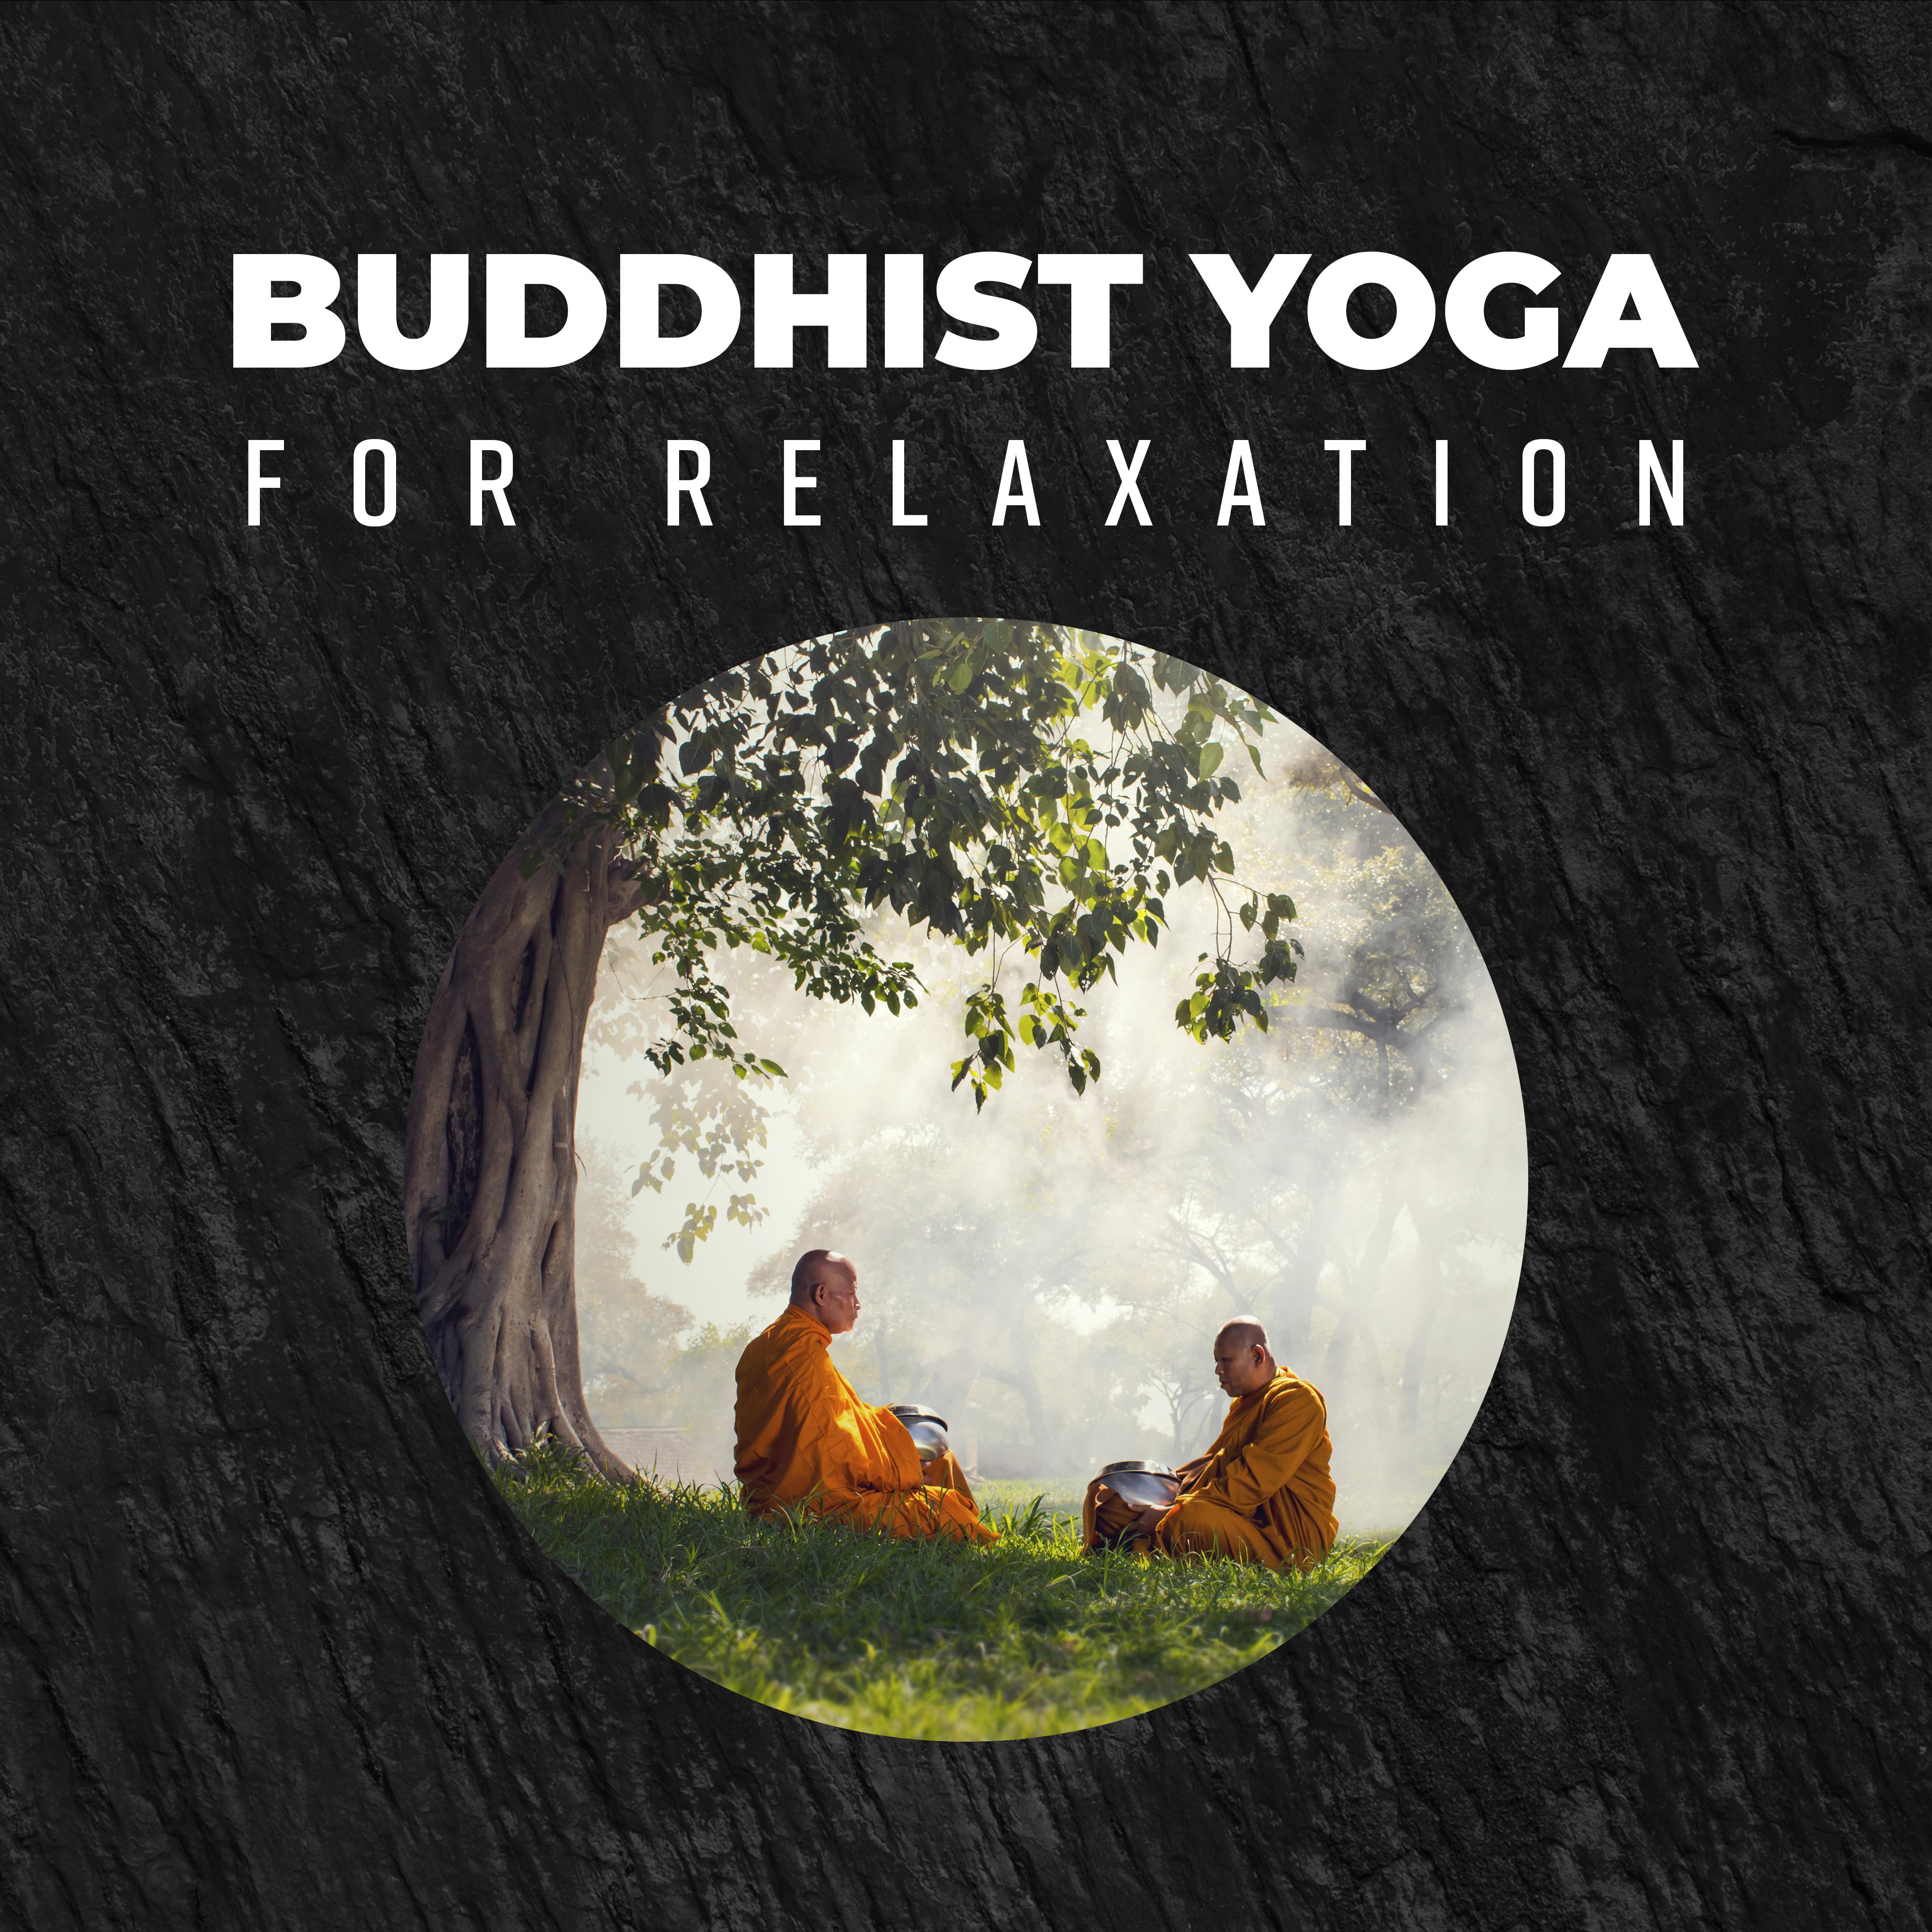 Buddhist Yoga for Relaxation